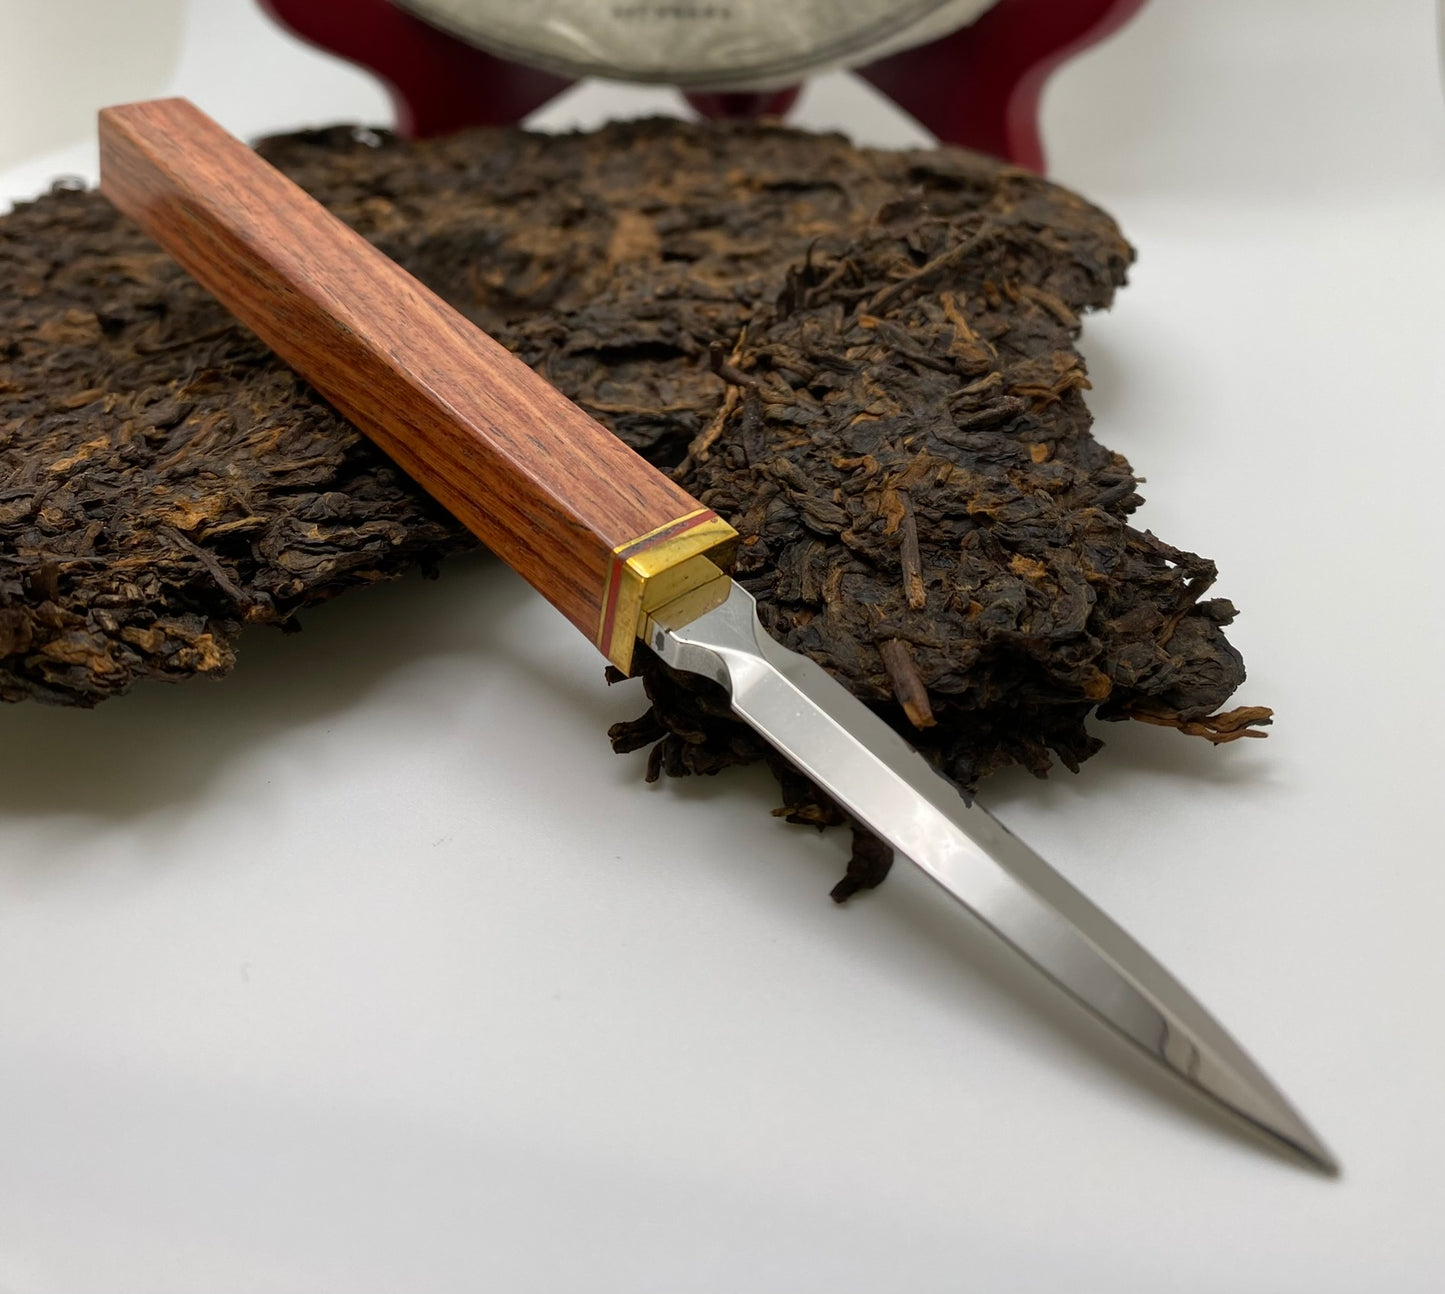 Pu'er Tea Knife with Square Wooden Handle